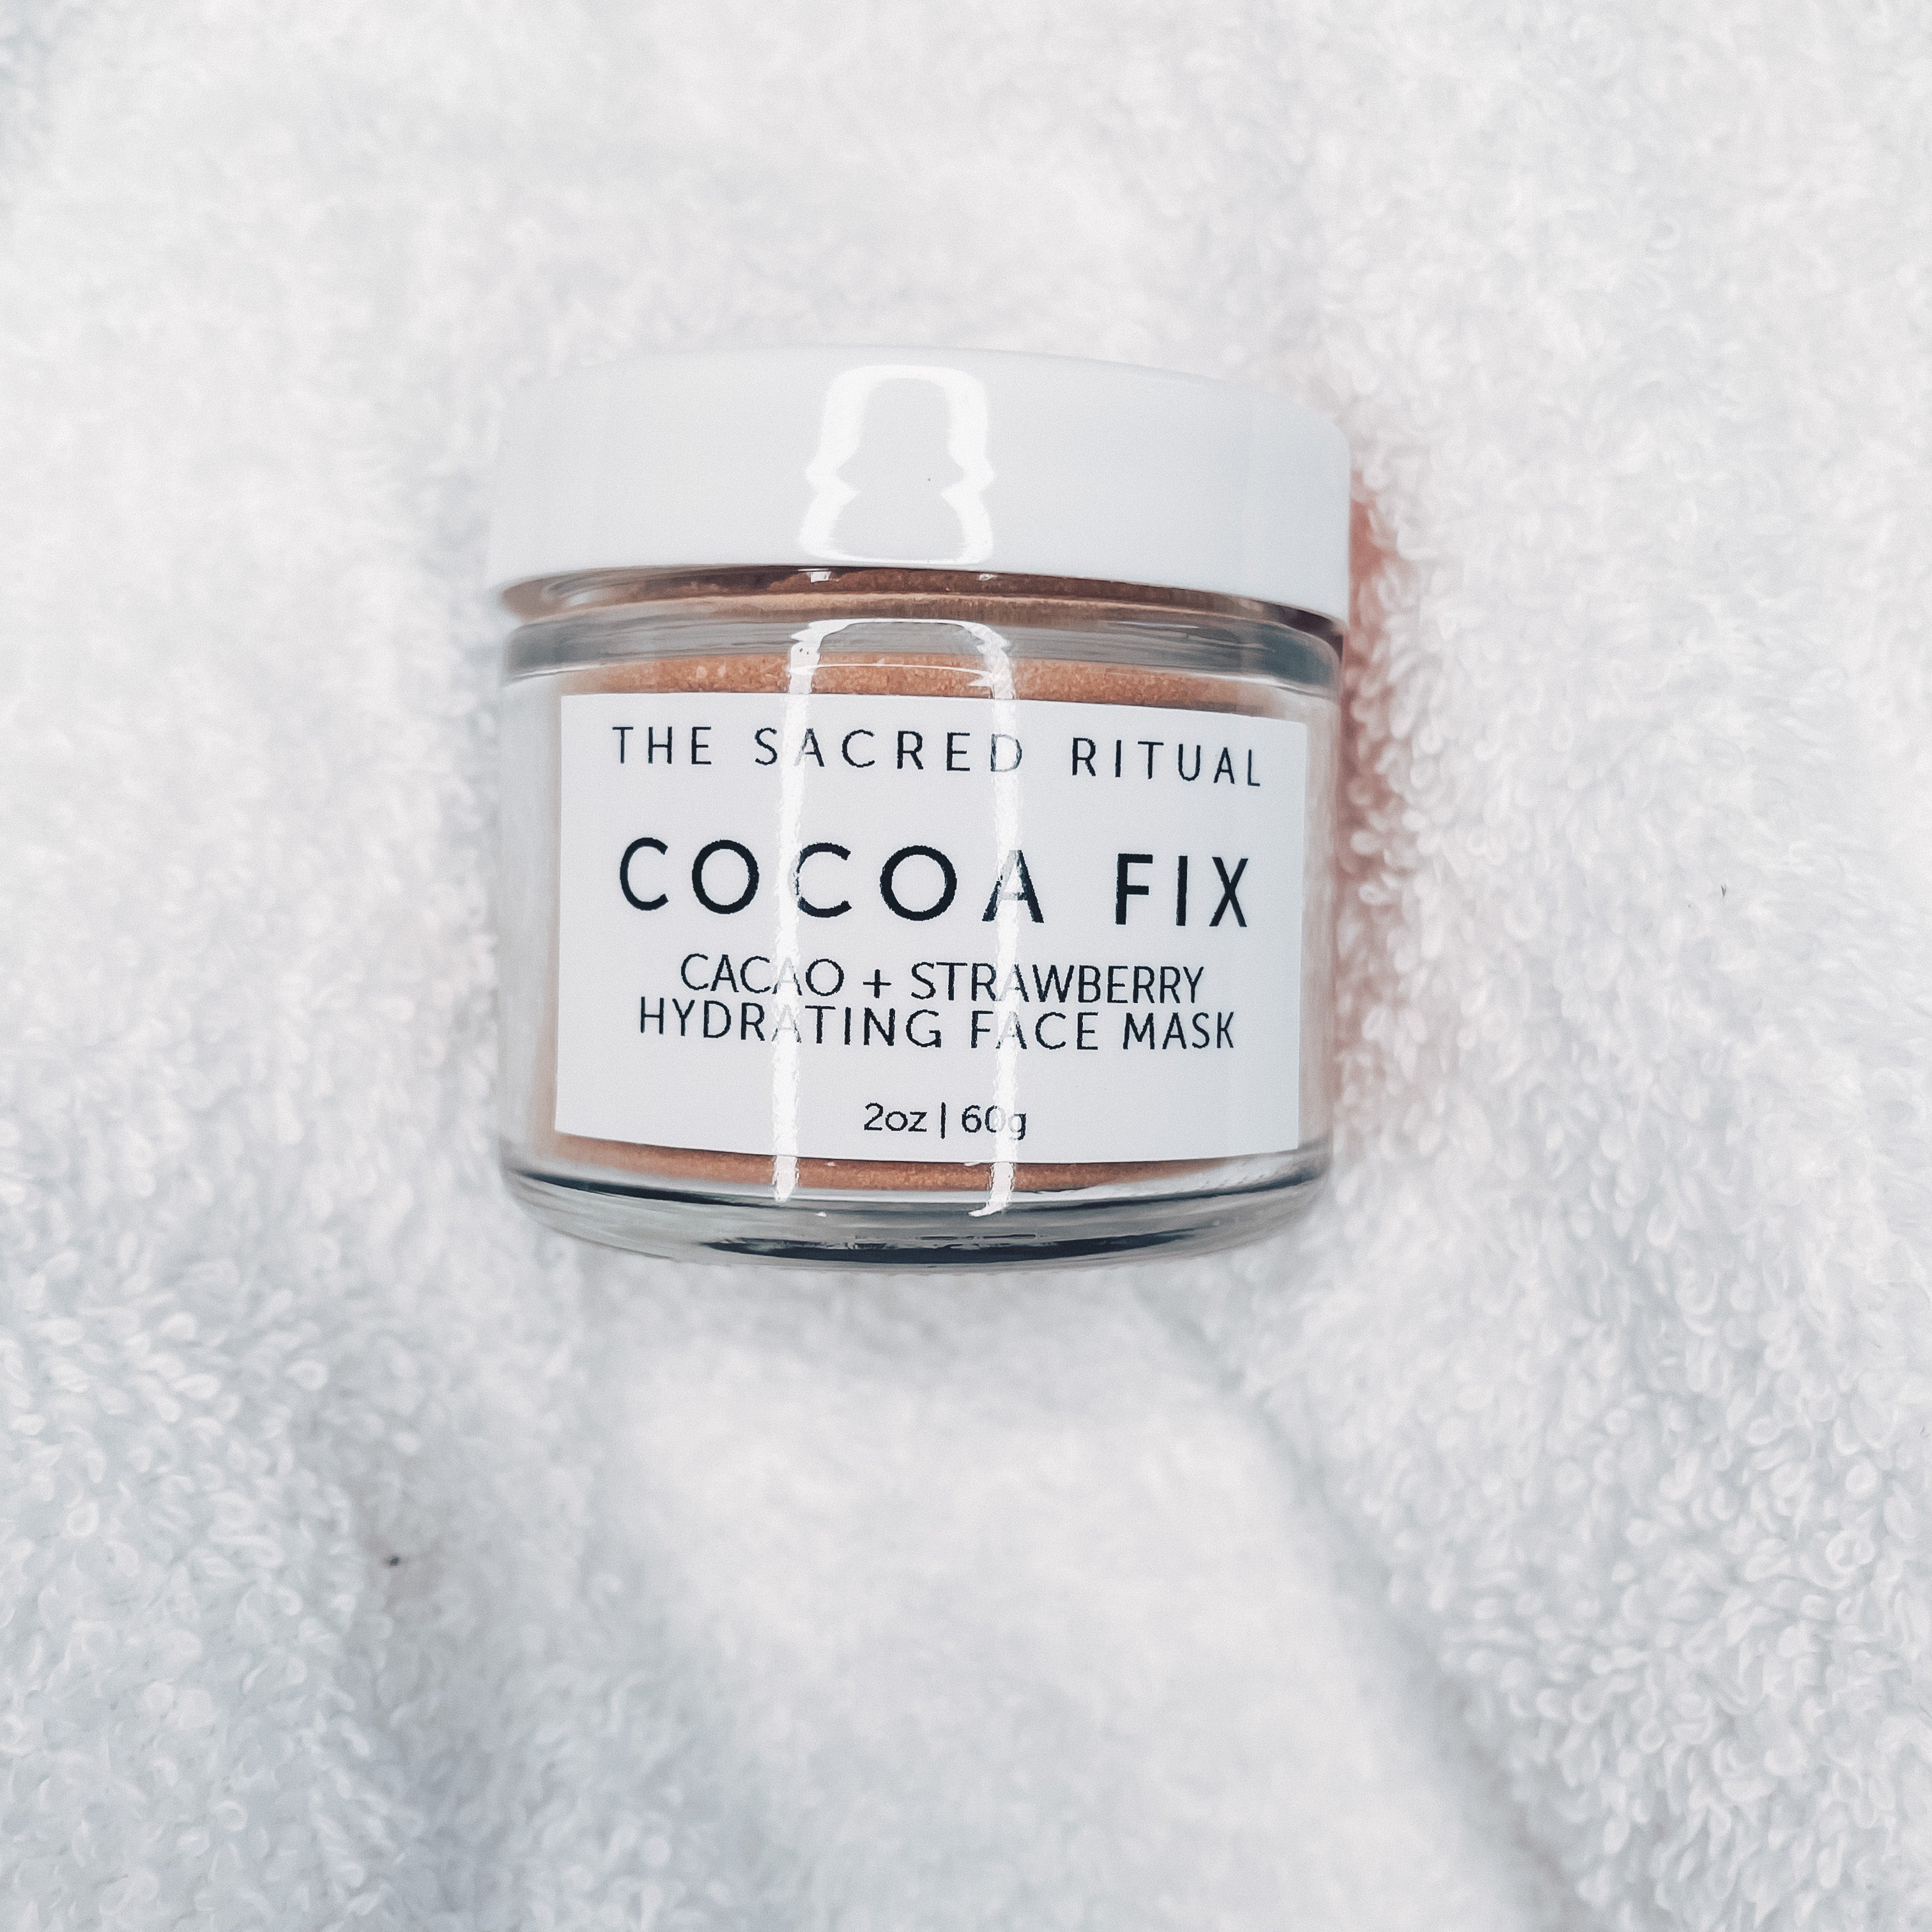 COCOA FIX Strawberry Hydrating Face Mask